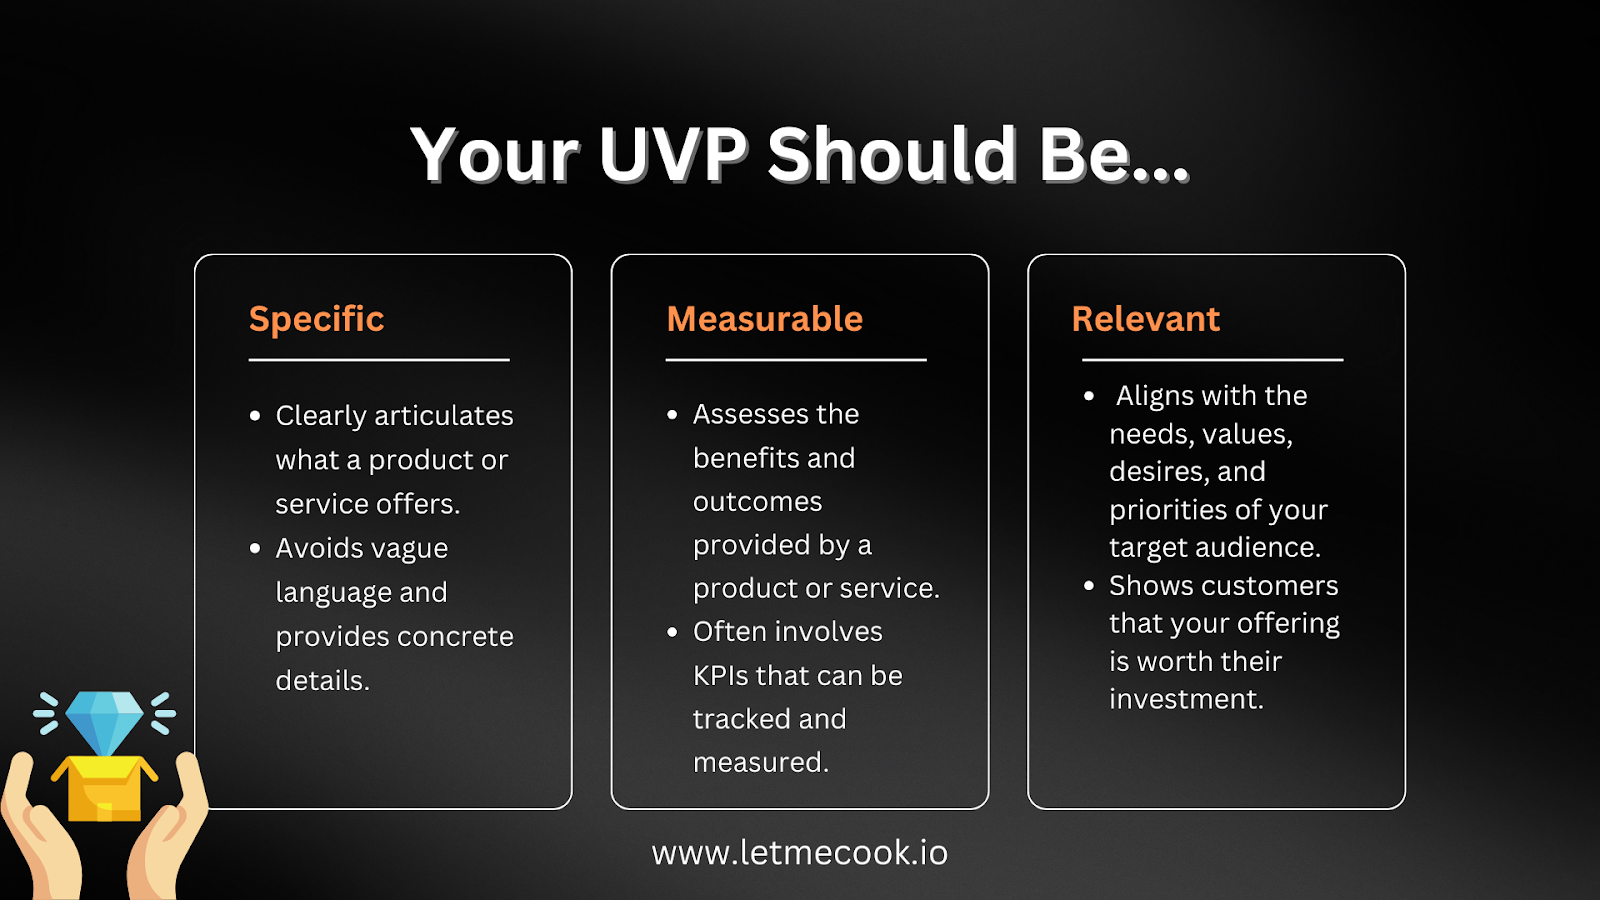 B2B SaaS product marketing is all about value. Here are three things your unique value proposition (UVP) should be. Read the full article for more information on designing your B2B SaaS go-to-market strategy.